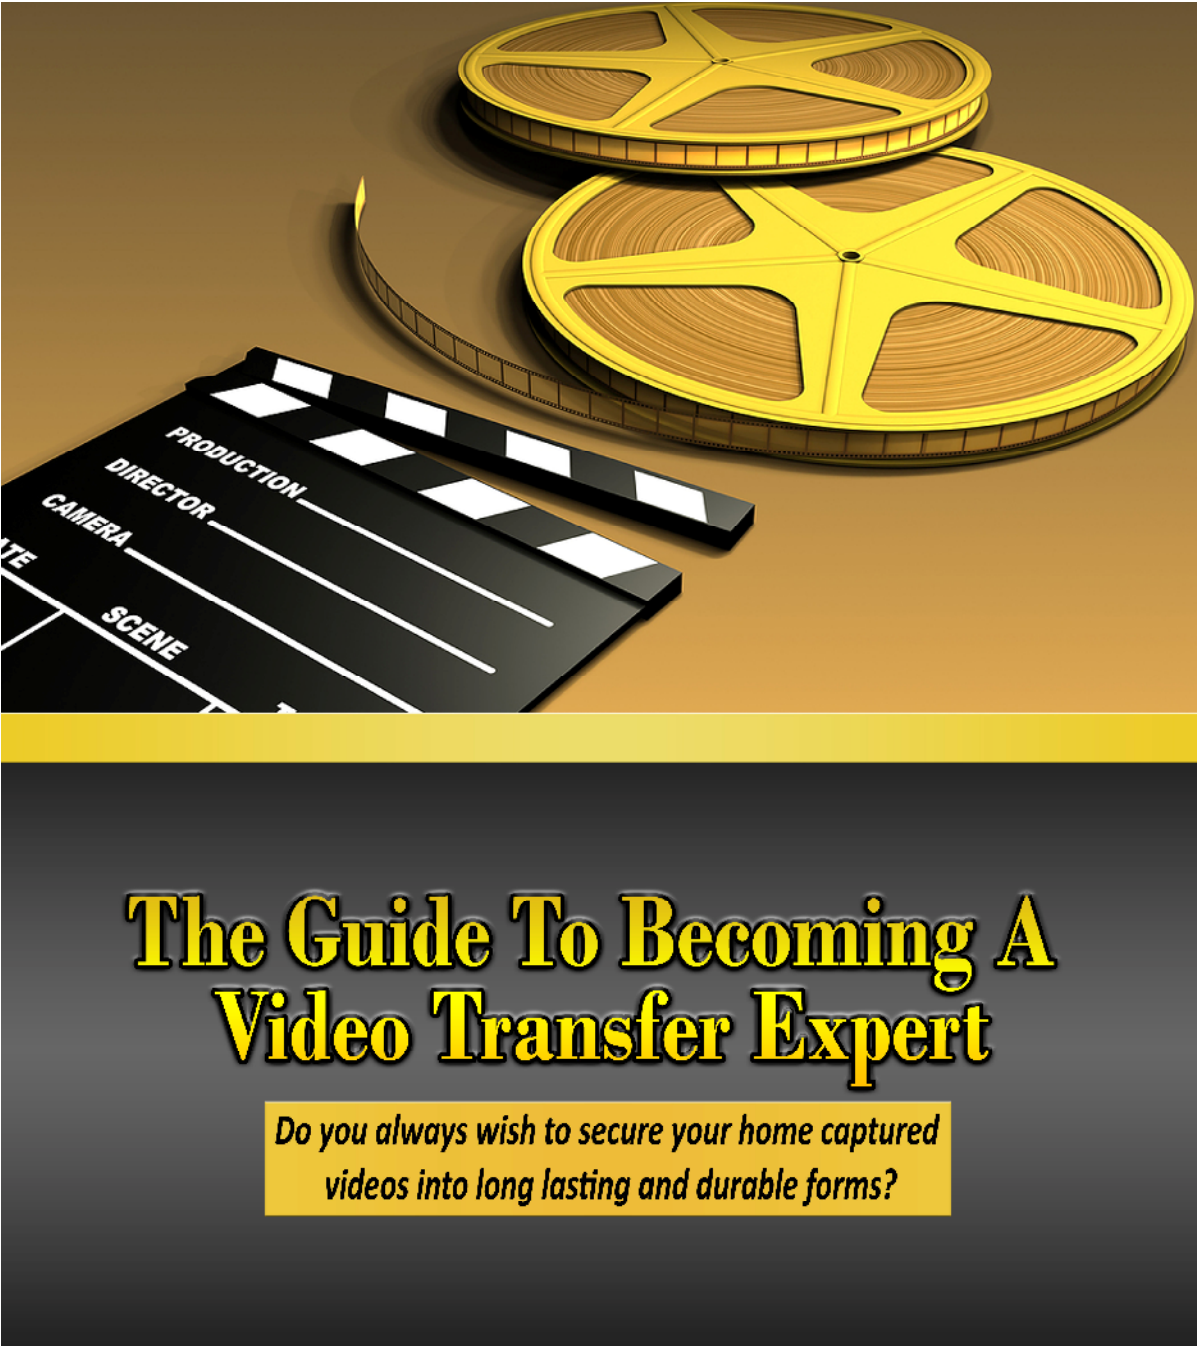 The Guide to Becoming a Video Transfer Expert